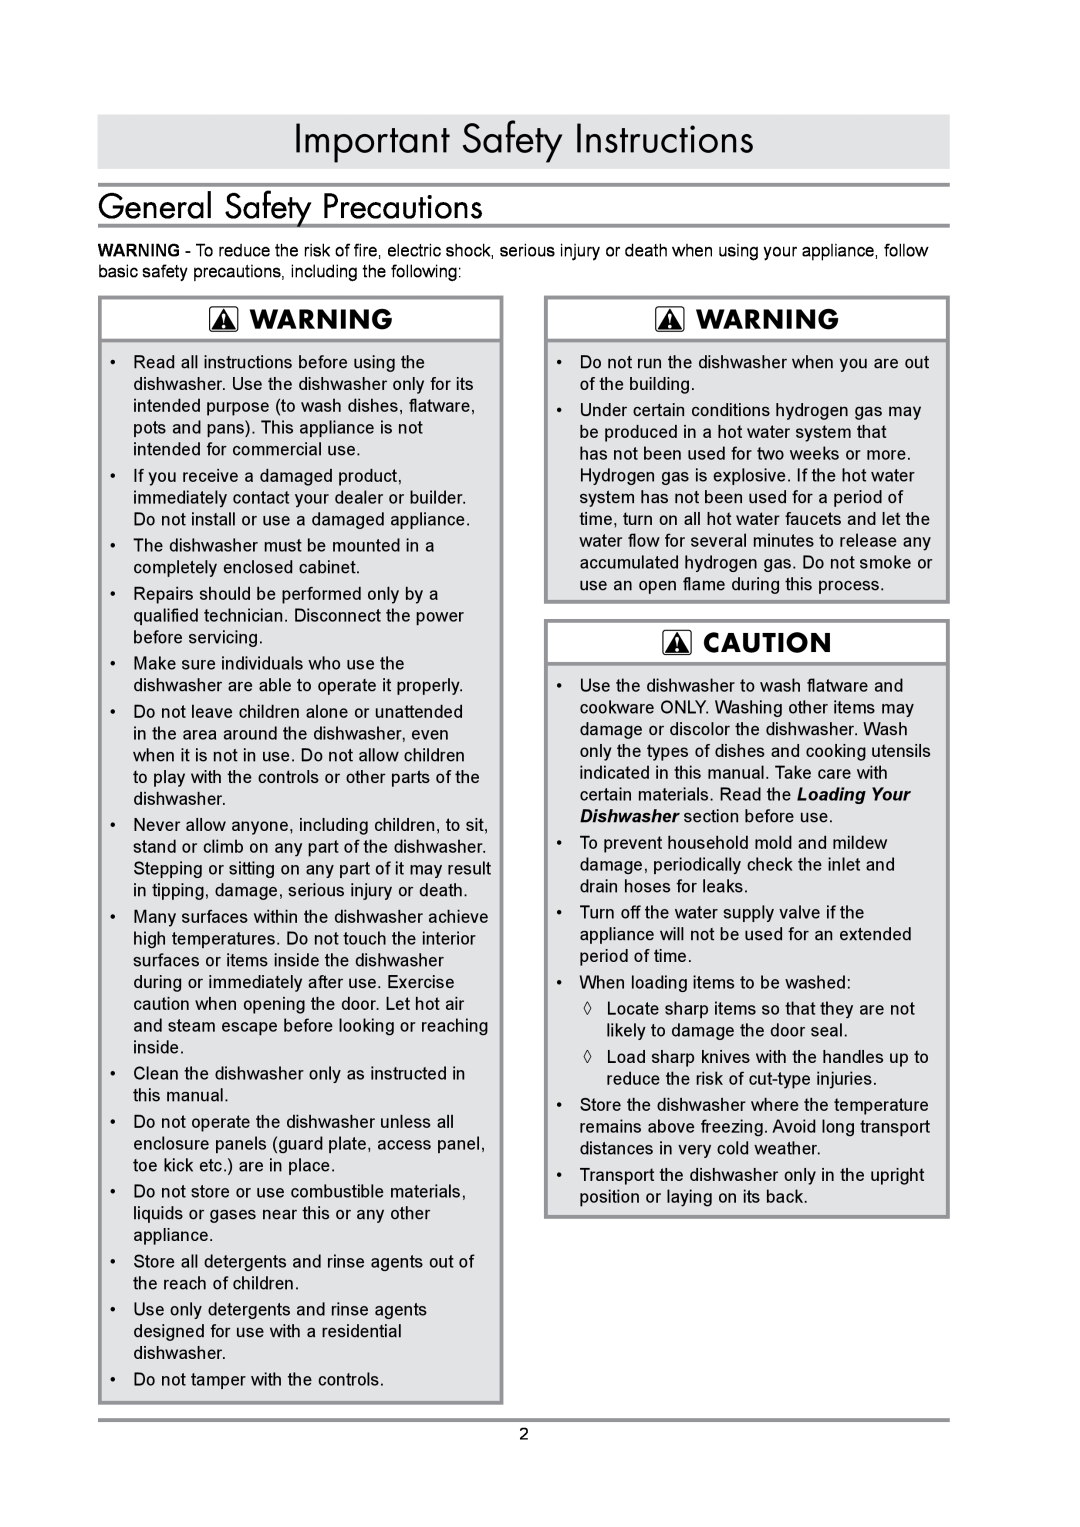 Dacor renaissance built-in dishwasher manual General Safety Precautions, Important Safety Instructions 